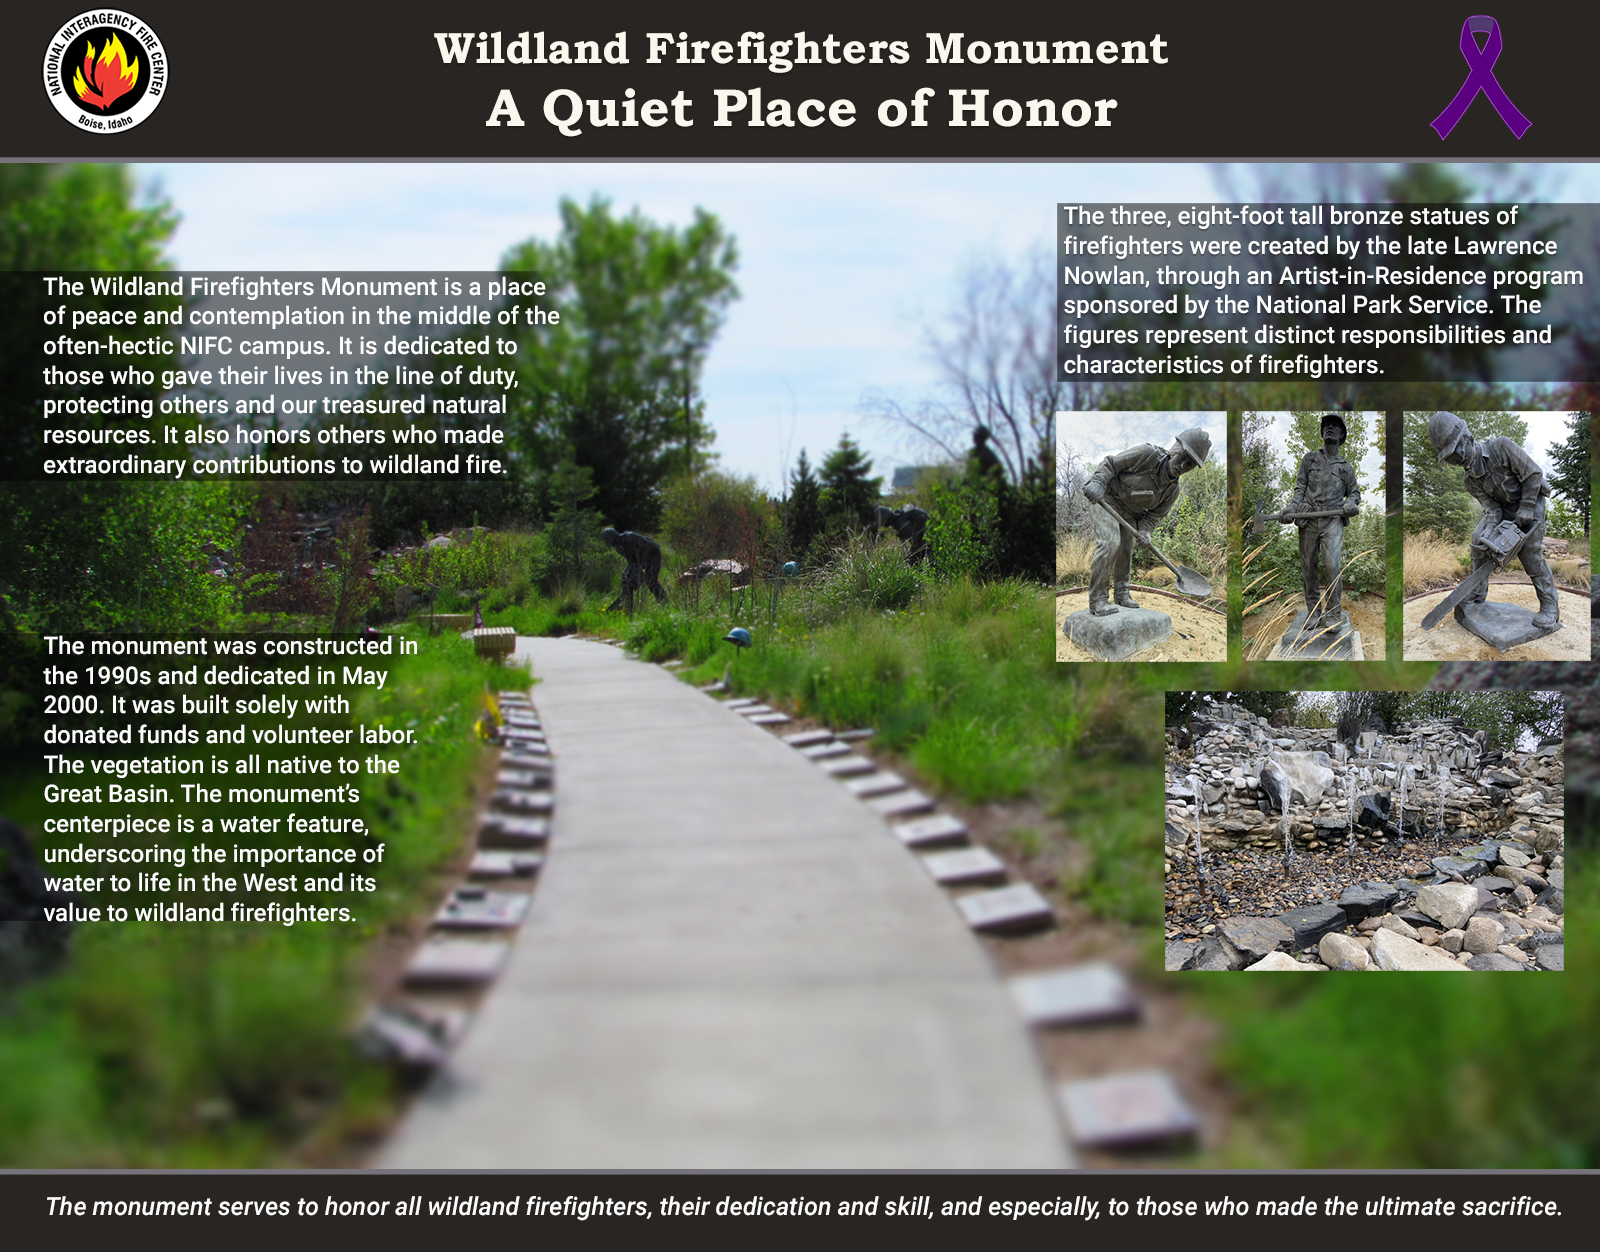 Interpretive Sign titled "Wildland Firefighters Monument: A Quiet Place of Honor"